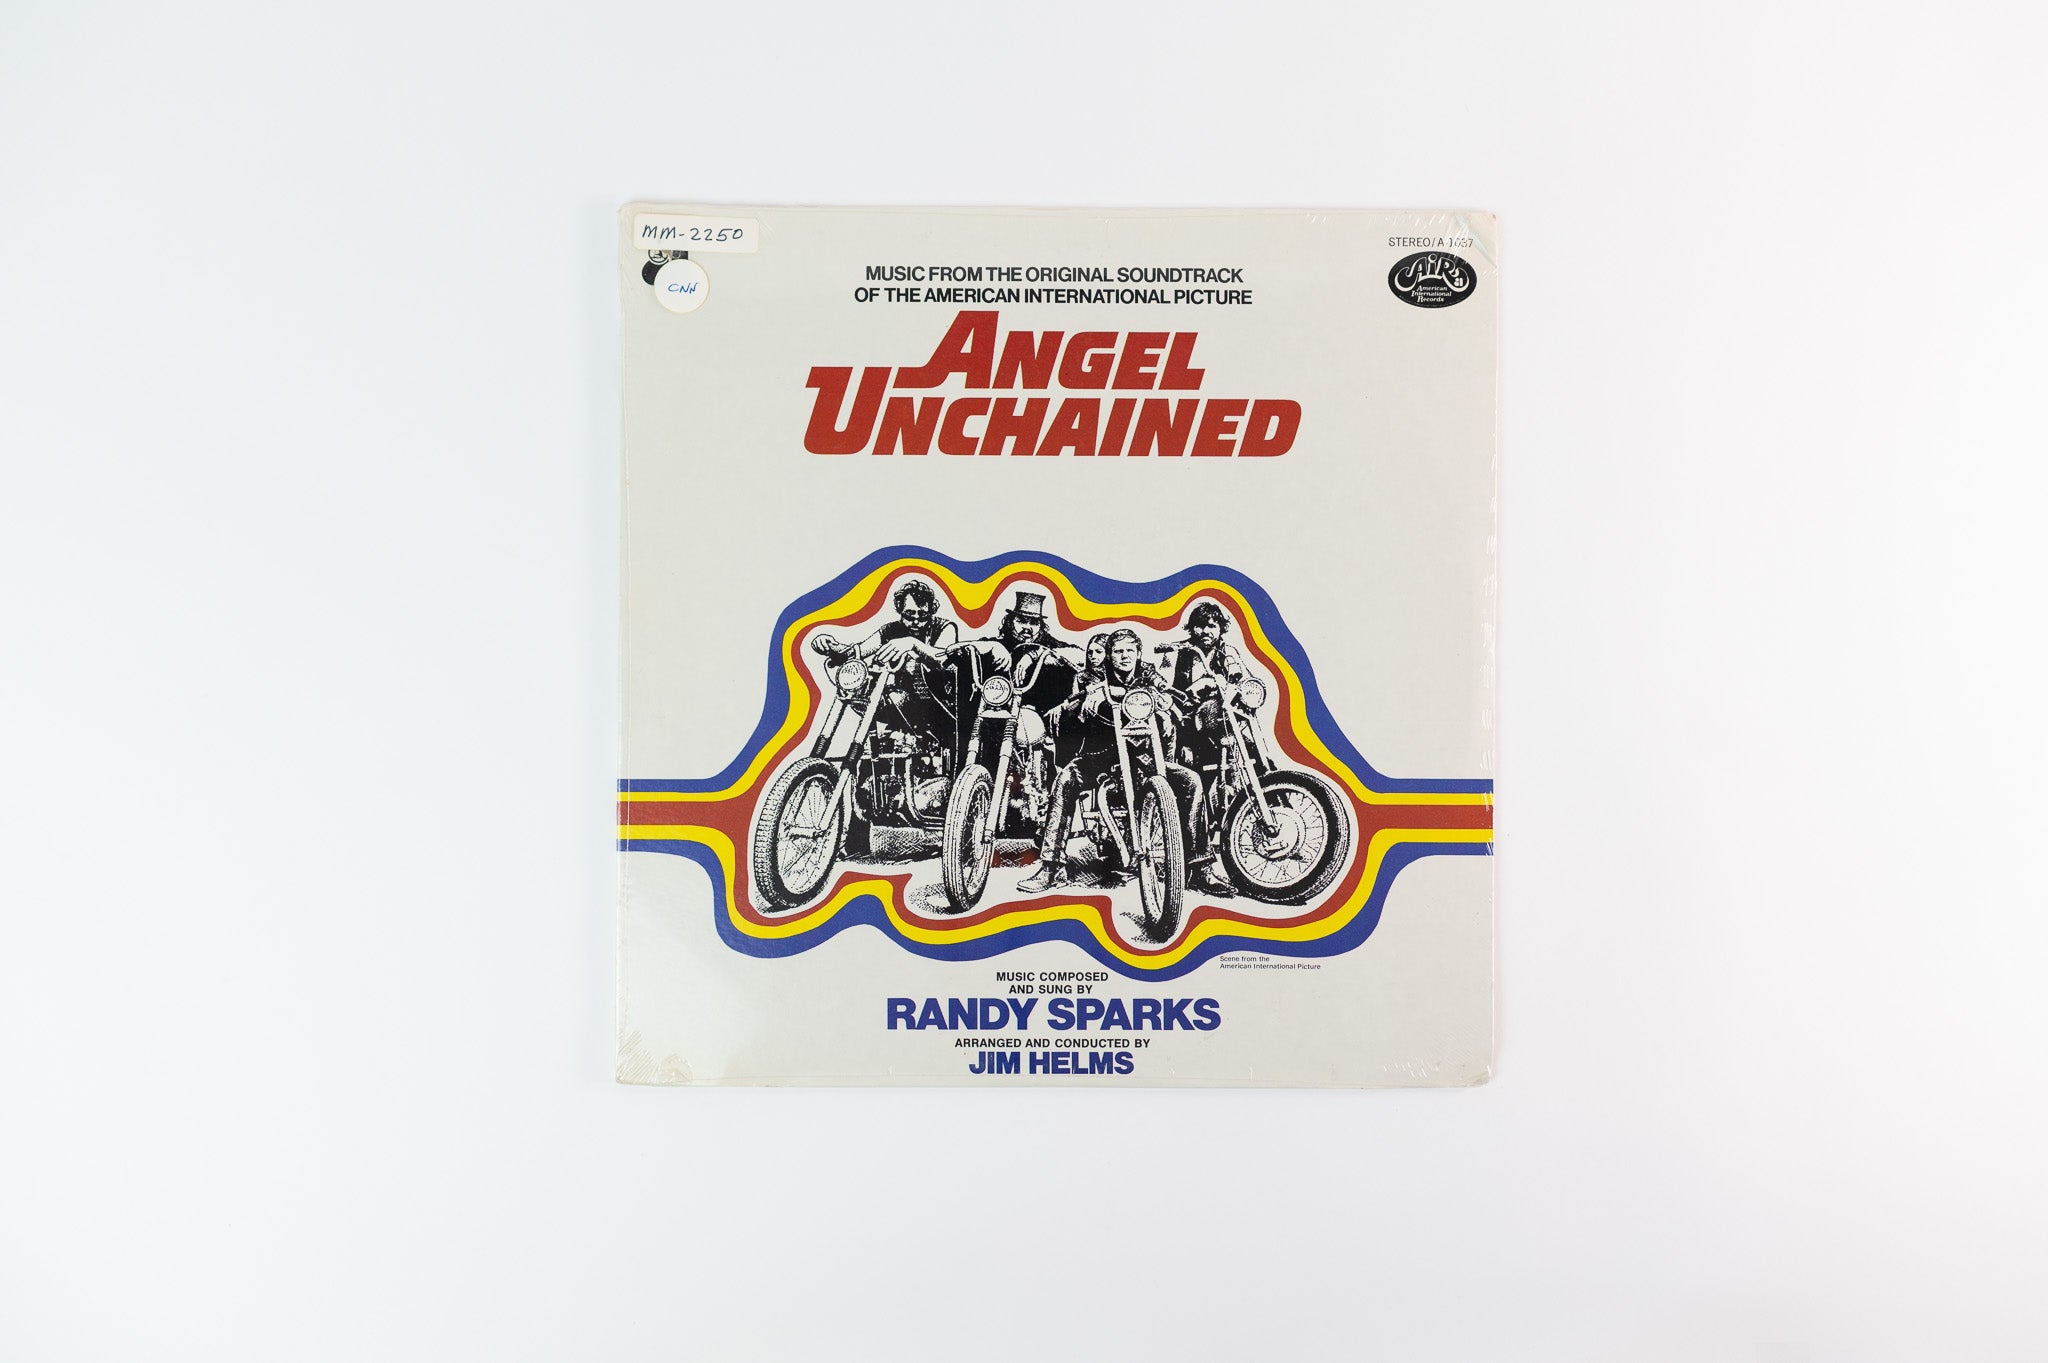 Randy Sparks - Angel Unchained (Original Soundtrack) on American International Records - Sealed